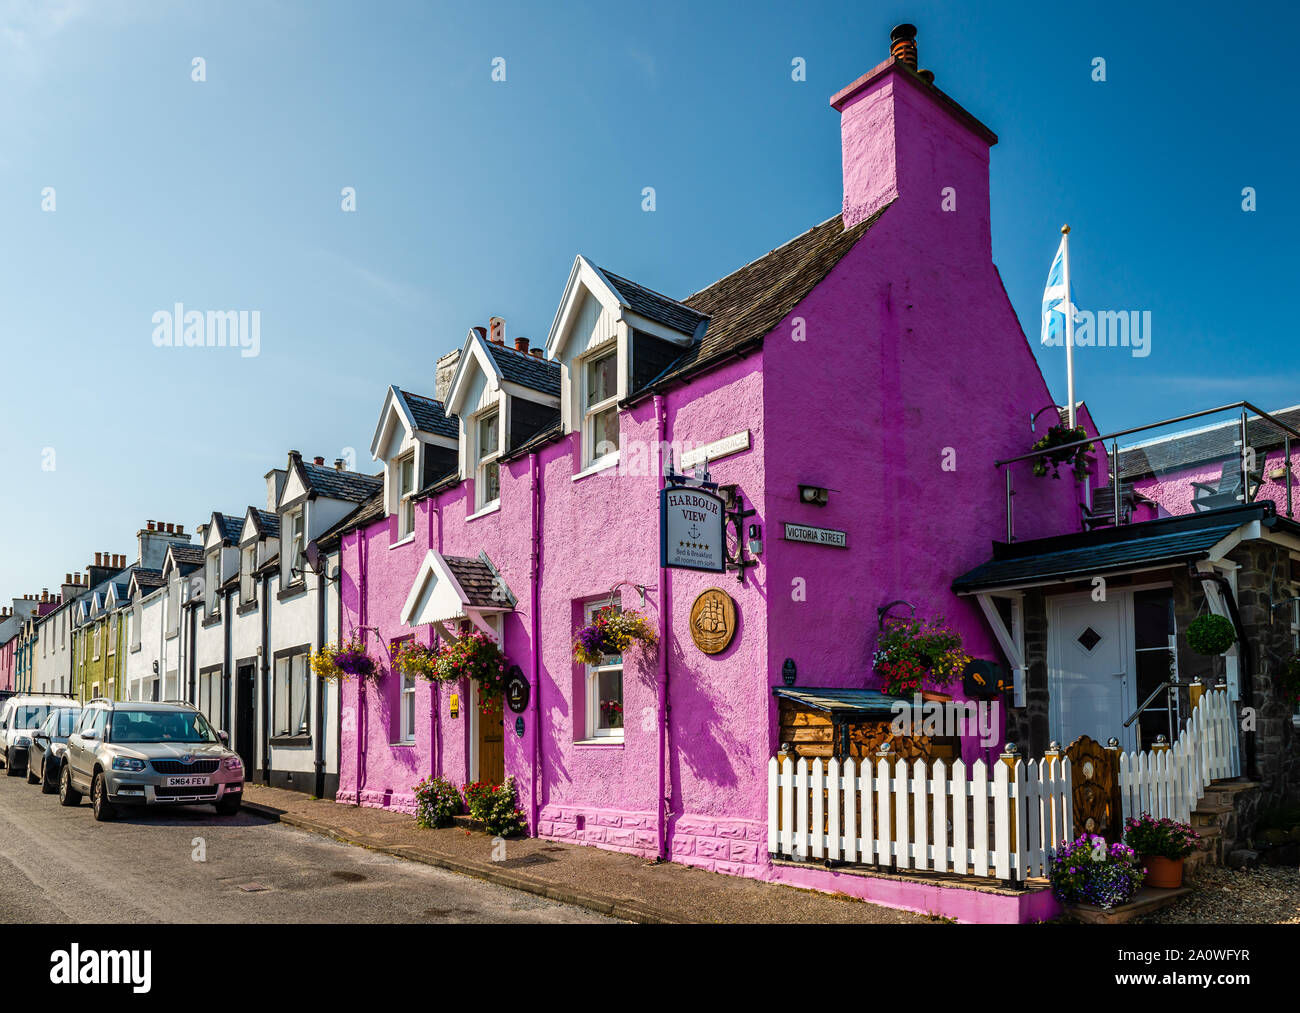 View of buildings in Argyll Terrace, a street in upper Tobermory, that has magnificent view over the Bay and the Sound of Mull. Isle of Mull, Scotland. Stock Photo